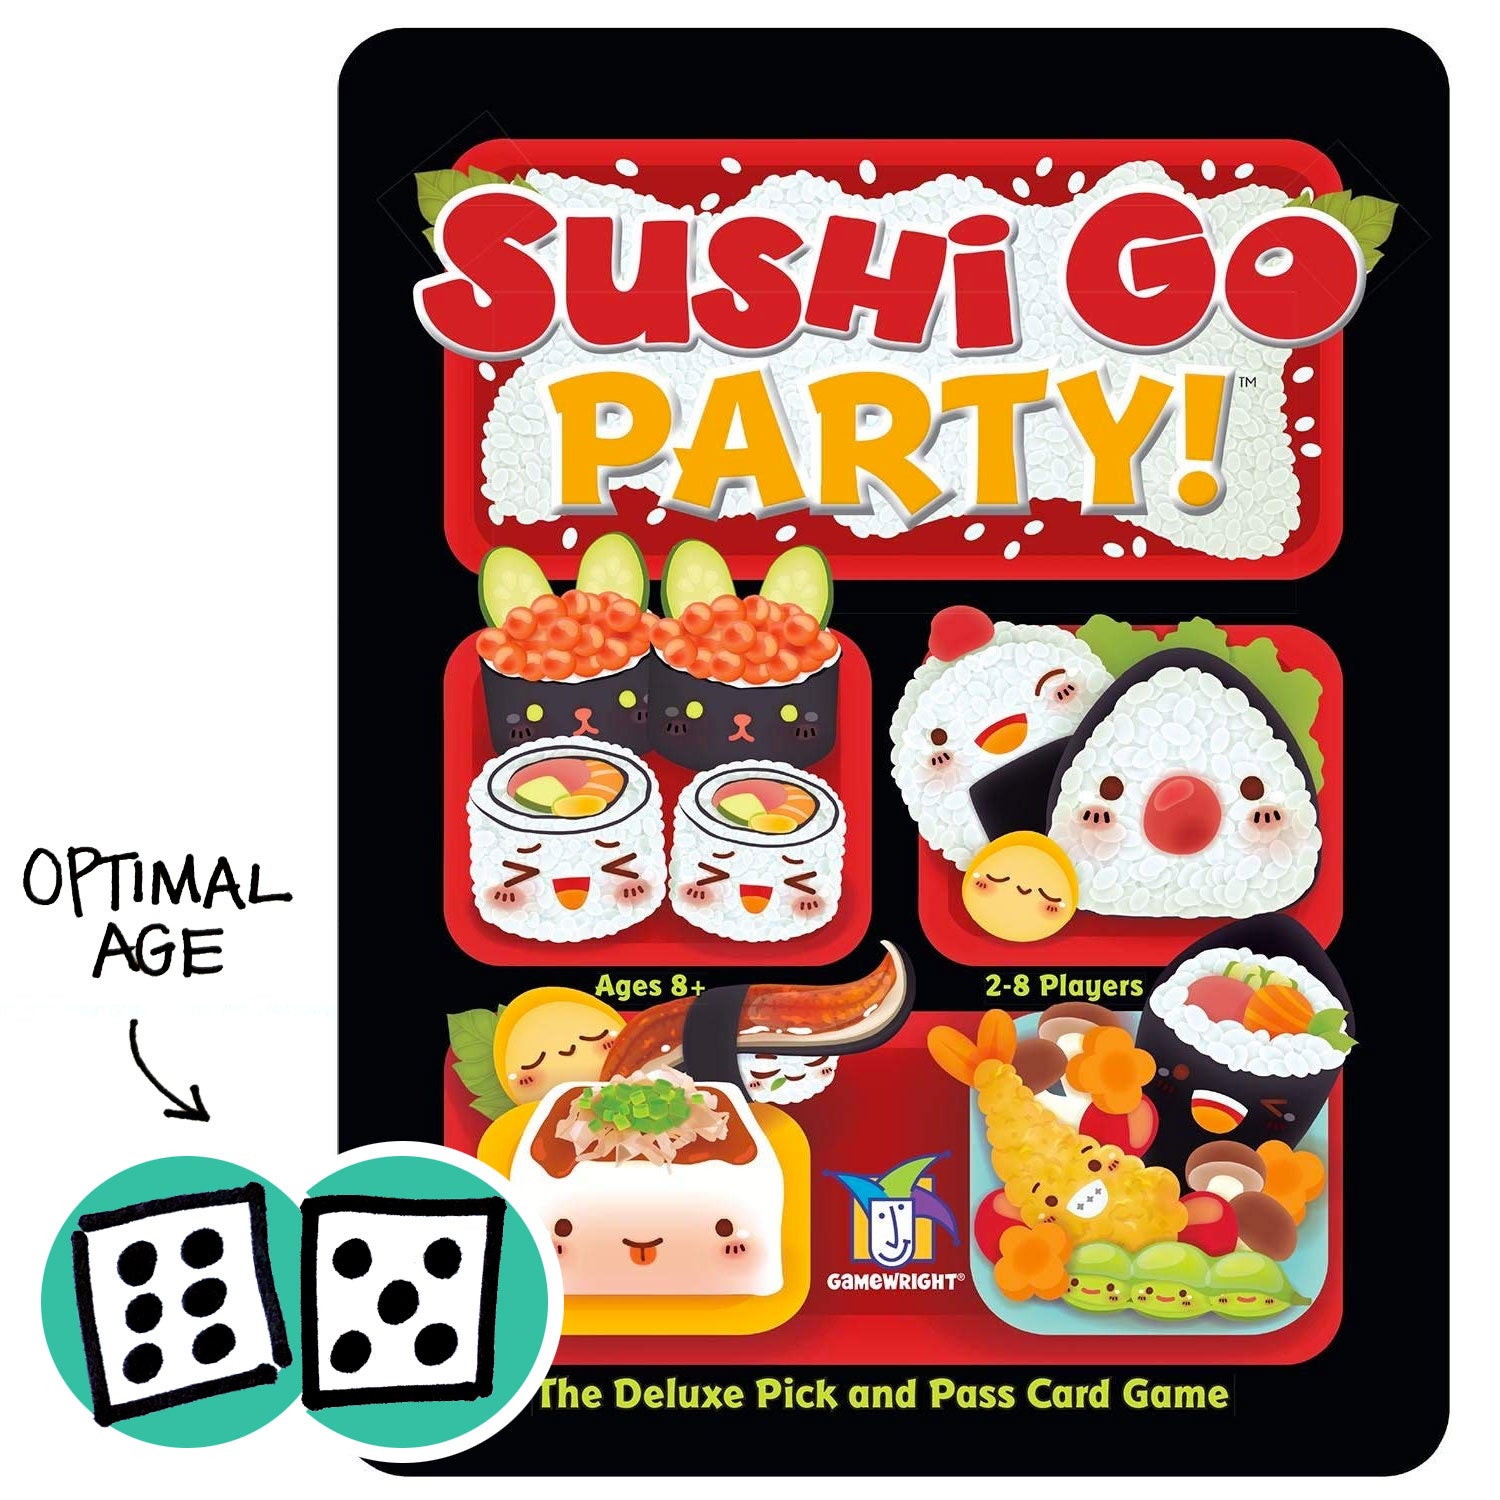 Sushi Go Party! with dice showing optimal age